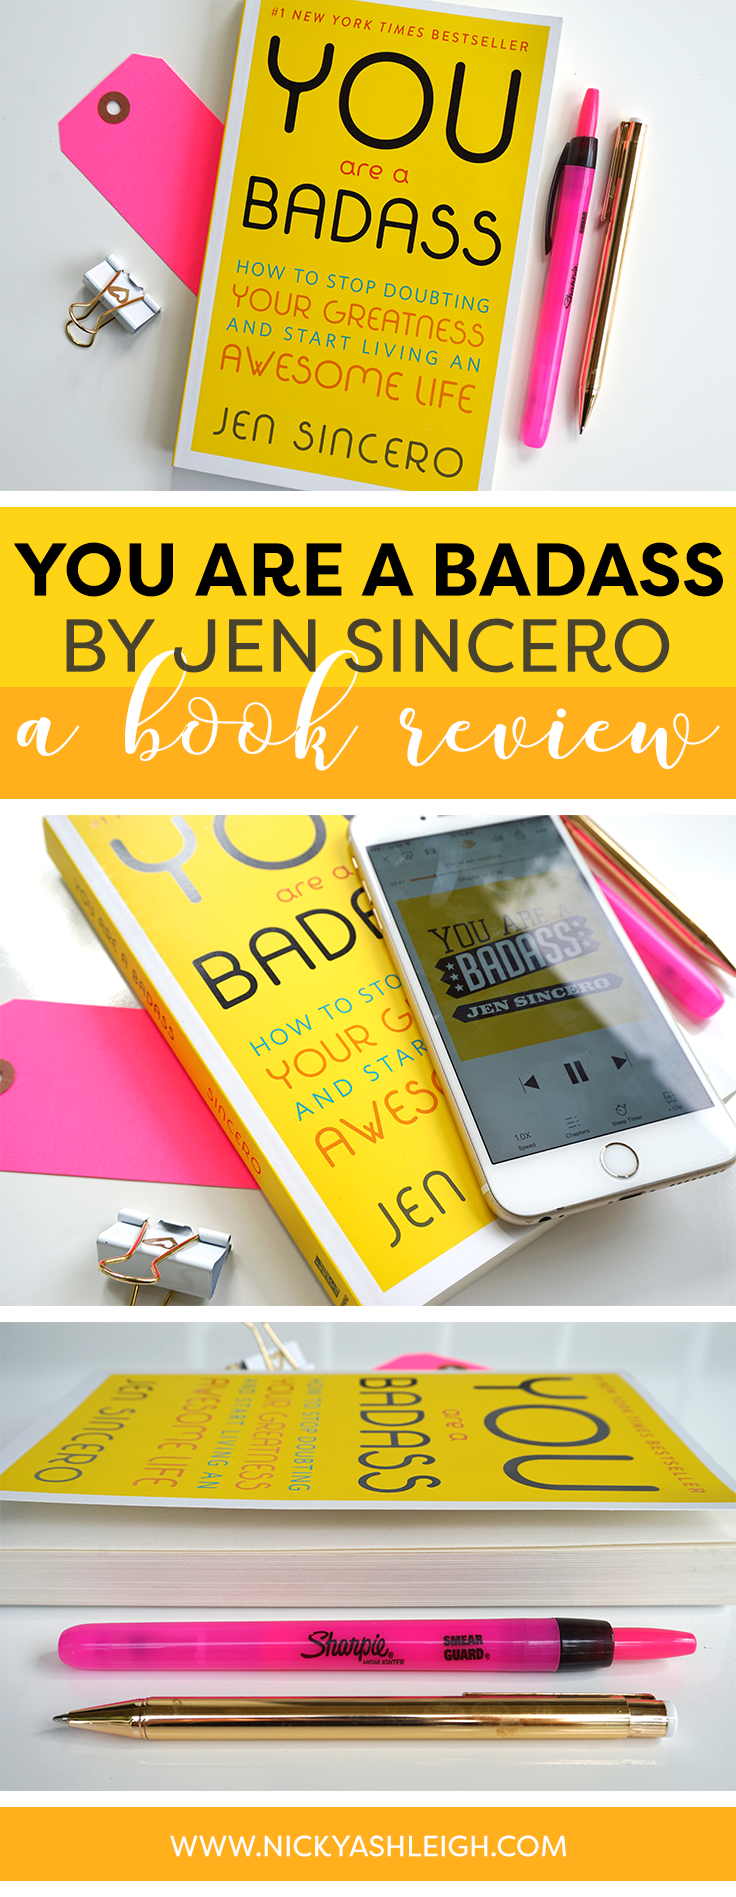 You Are a Badass By Jen Sincero | Book Review | www.nickyashleigh.com